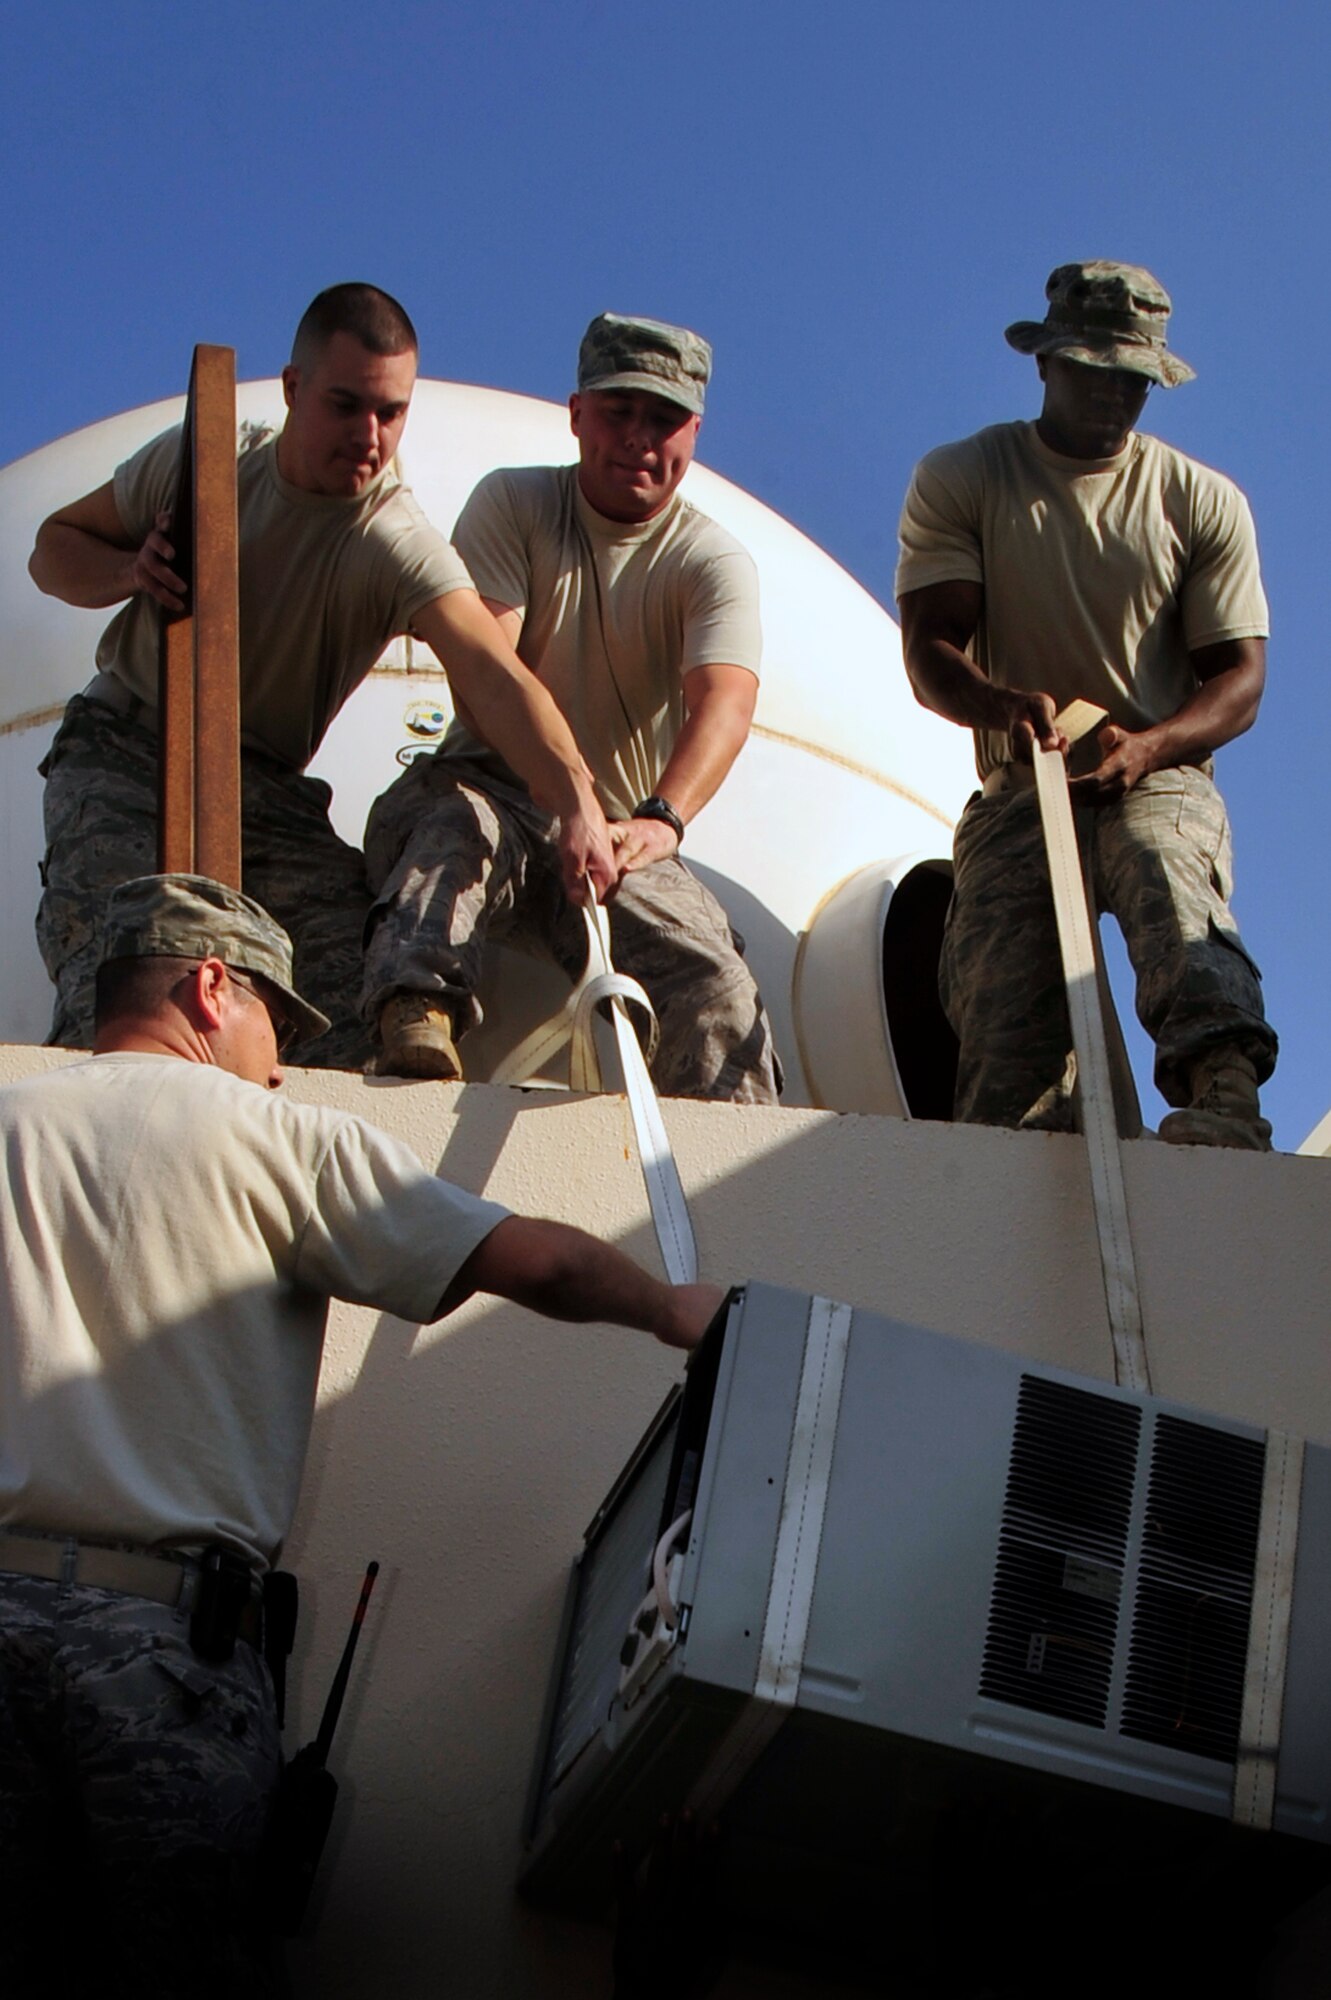 SOUTHWEST ASIA – Members of the 380th Expeditionary Civil Engineer Squadron heating ventilation and air conditioning hoist a replacement air conditioner unit up to the roof Dec. 17, 2009. The air conditioner was wall-mounted by the HVAC Airmen and is used to cool communications equipment. (U.S. Air Force photo/Tech. Sgt. Charles Larkin Sr)